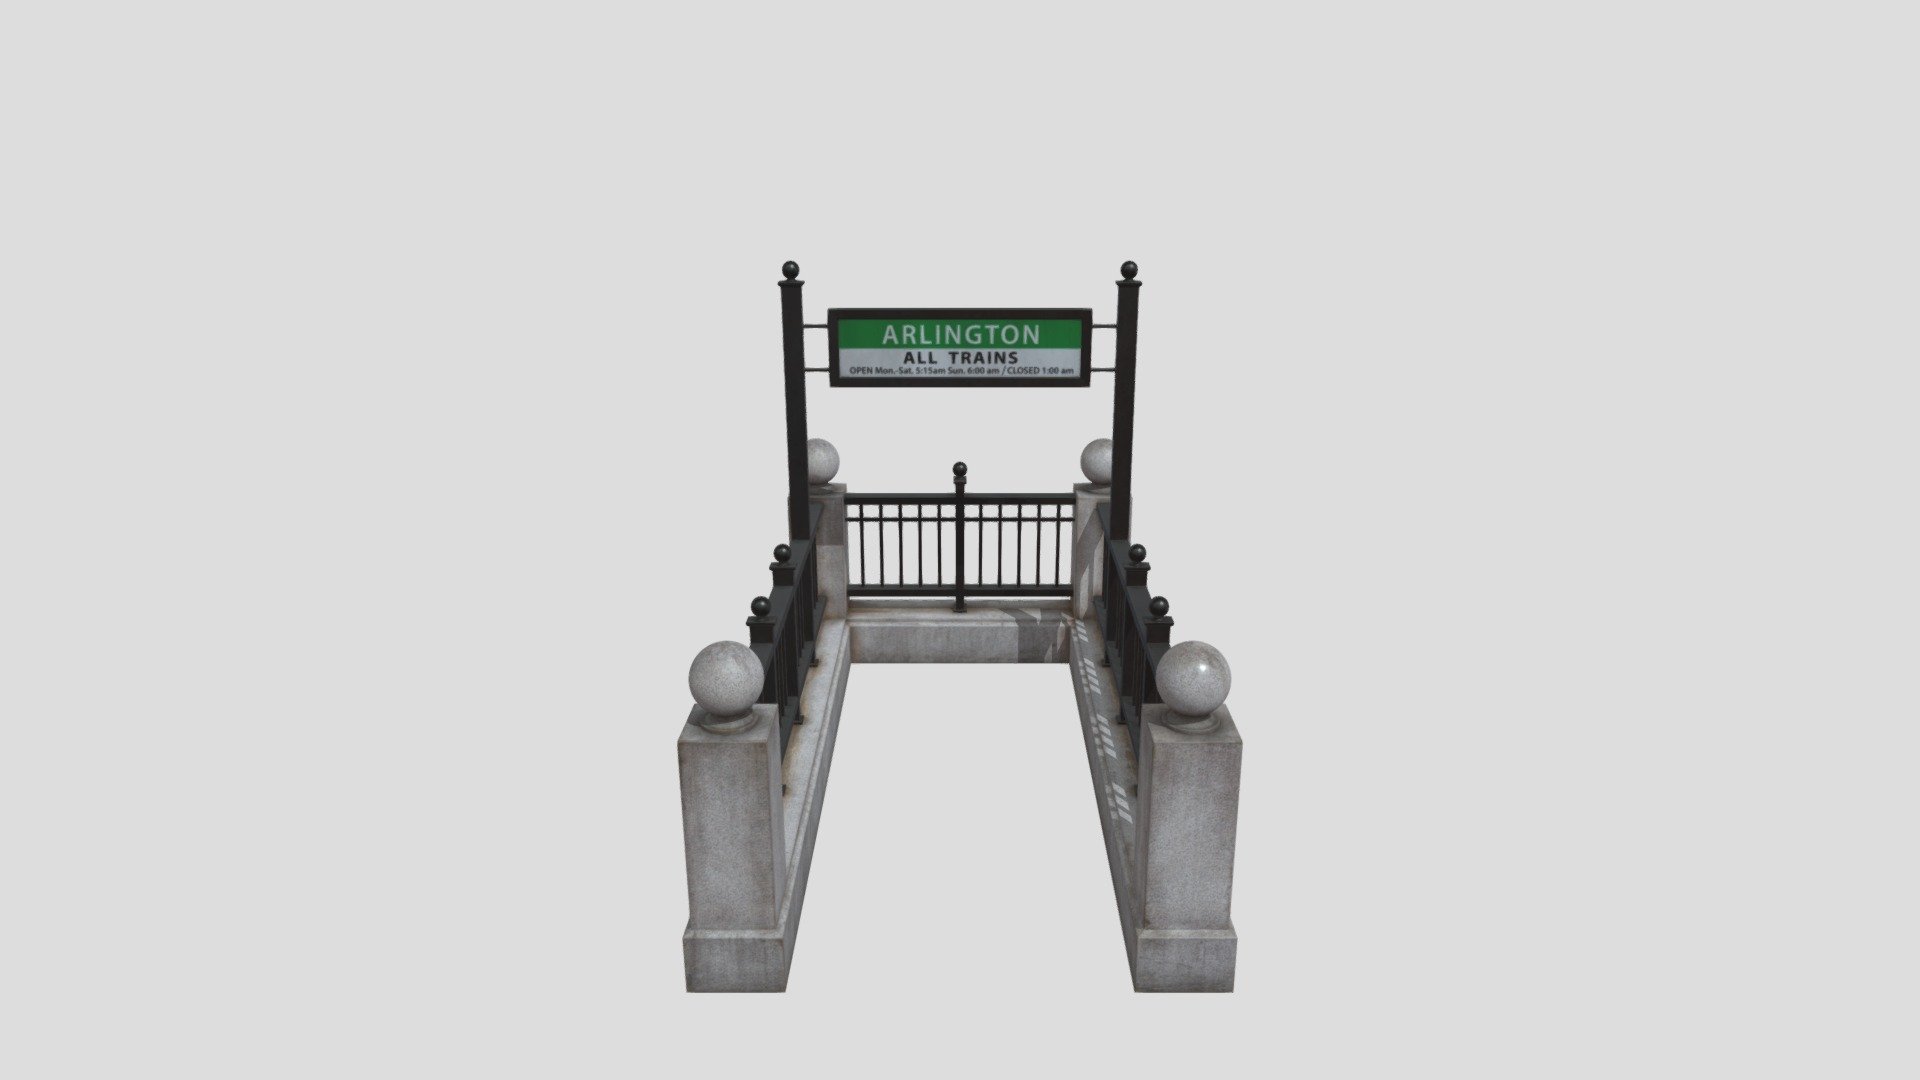 Professional, high quality 3d model of subway entrance ready to use in your visualizations with textures and materials included 3d model